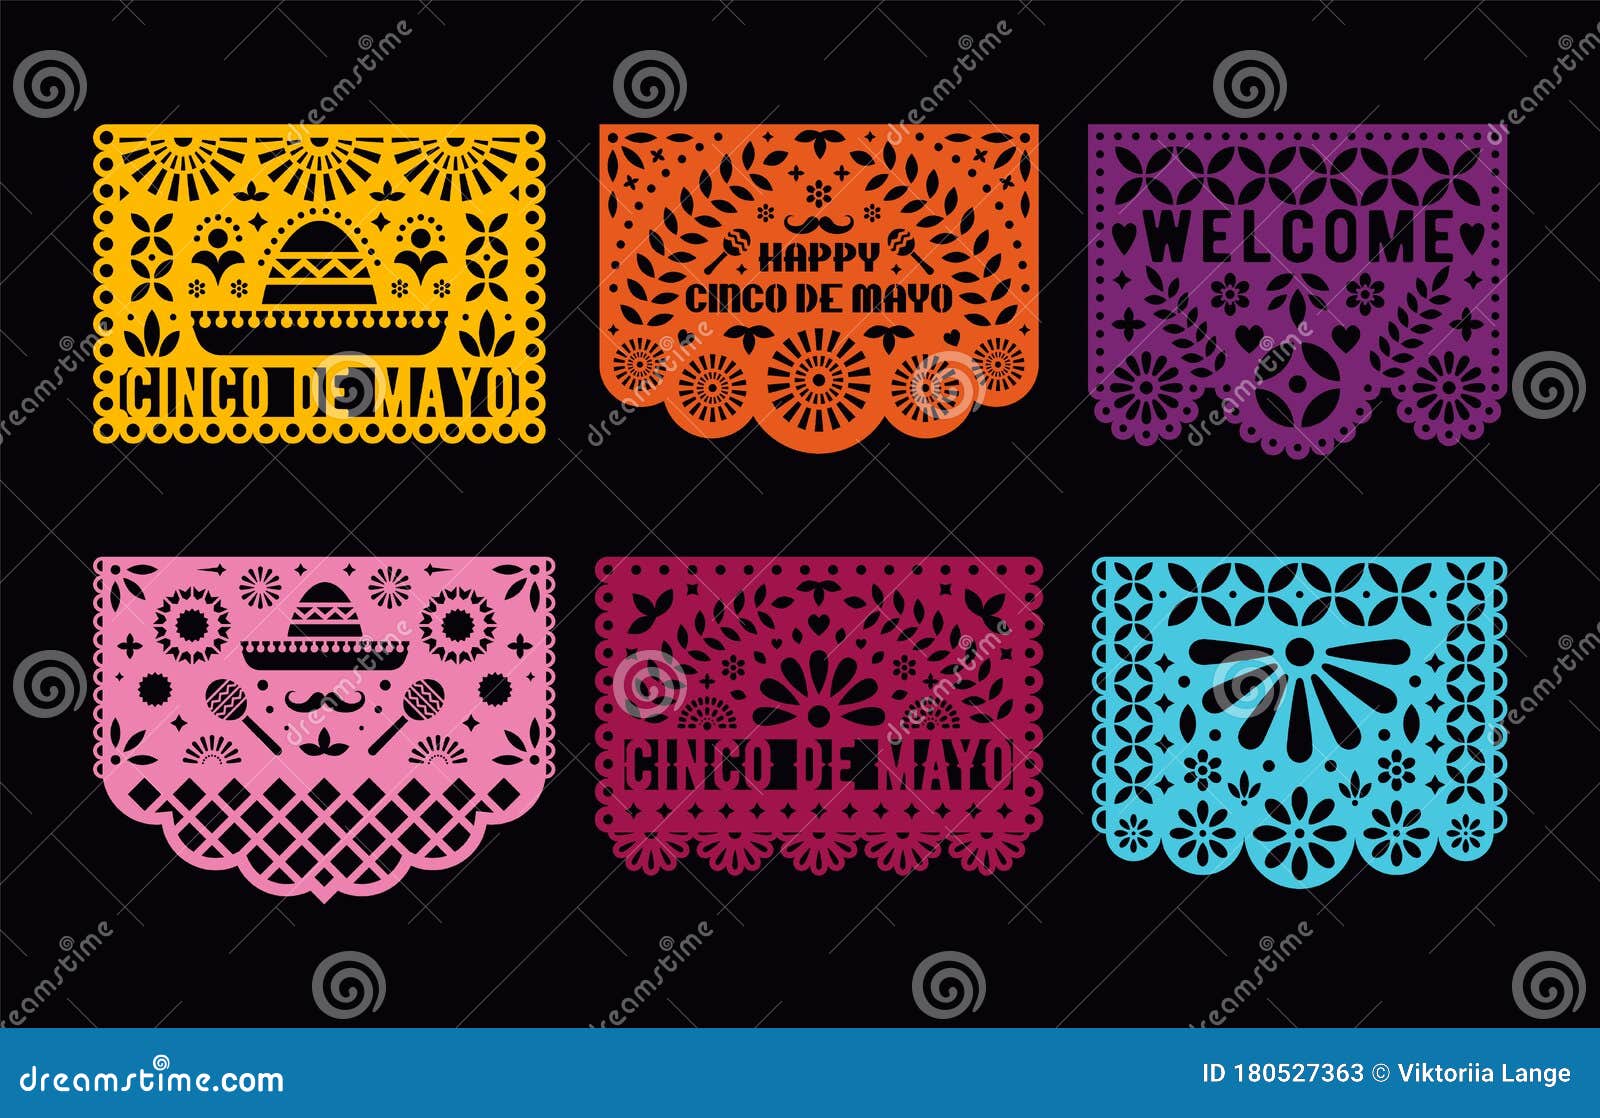  papel picado cards set. mexican paper decorations for party.